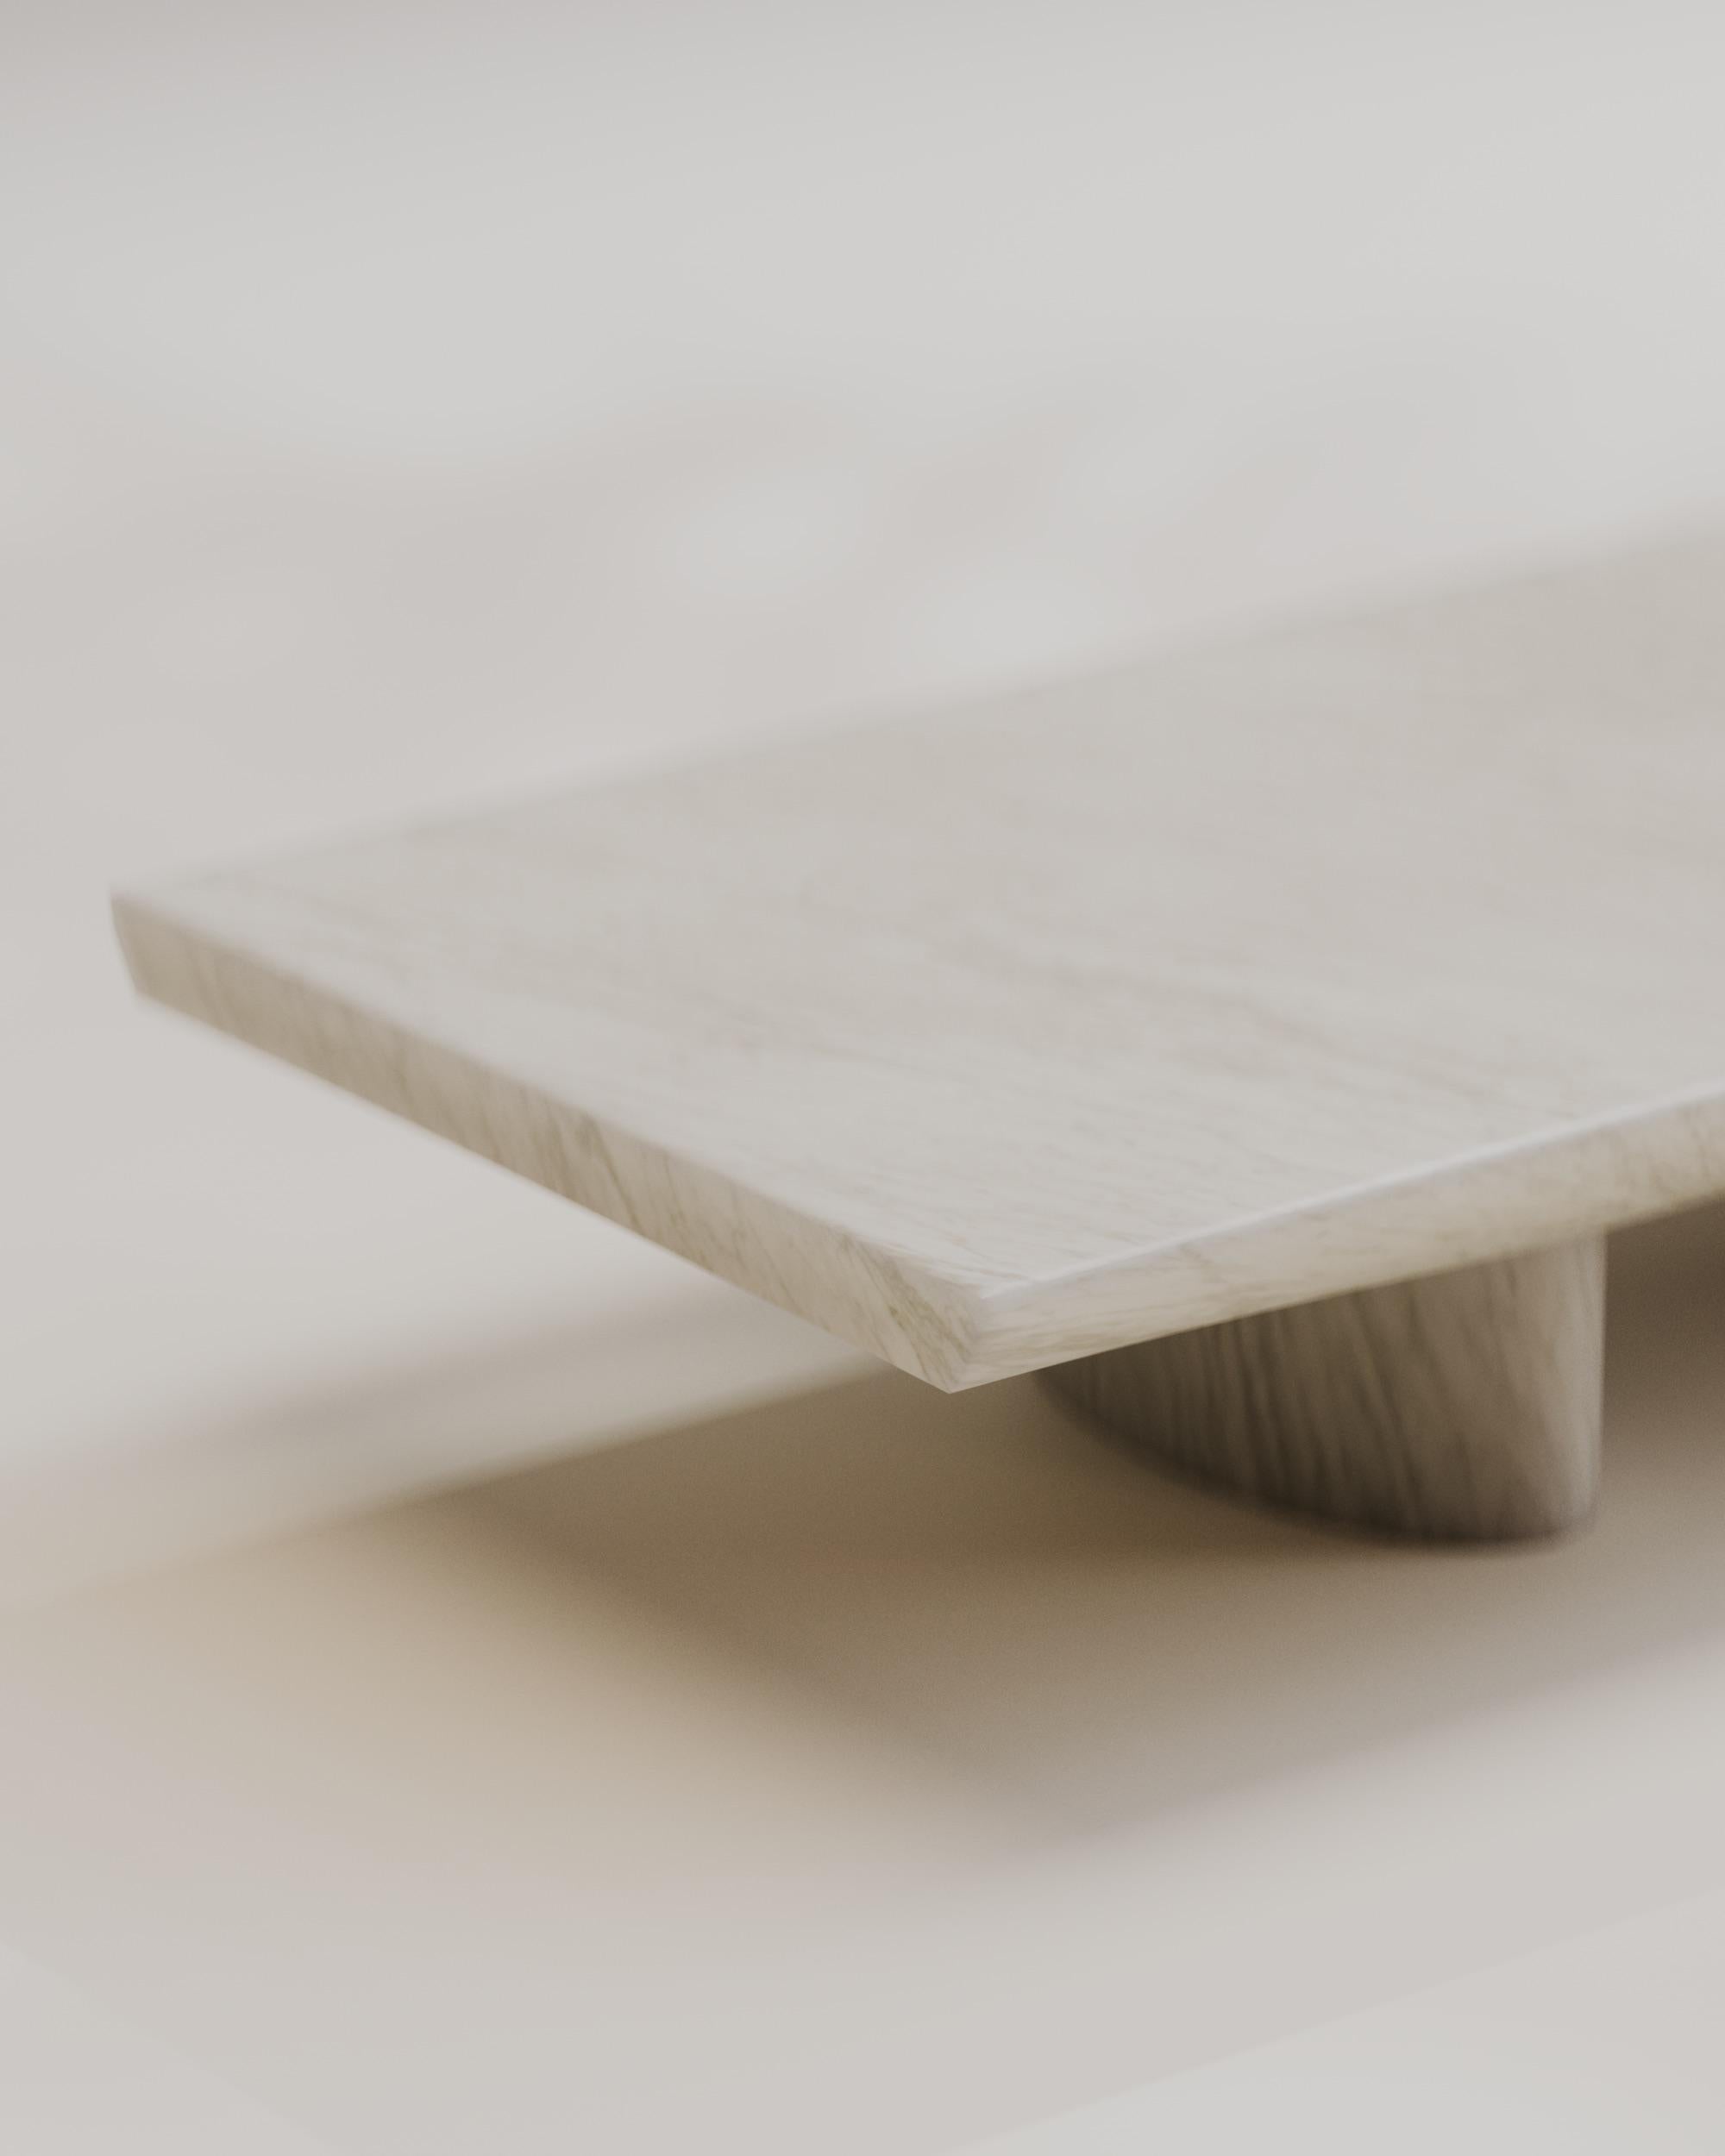 Hand-Crafted Solid White Marble Abraccio Rectangular Coffee Table 160 by Studio Narra For Sale